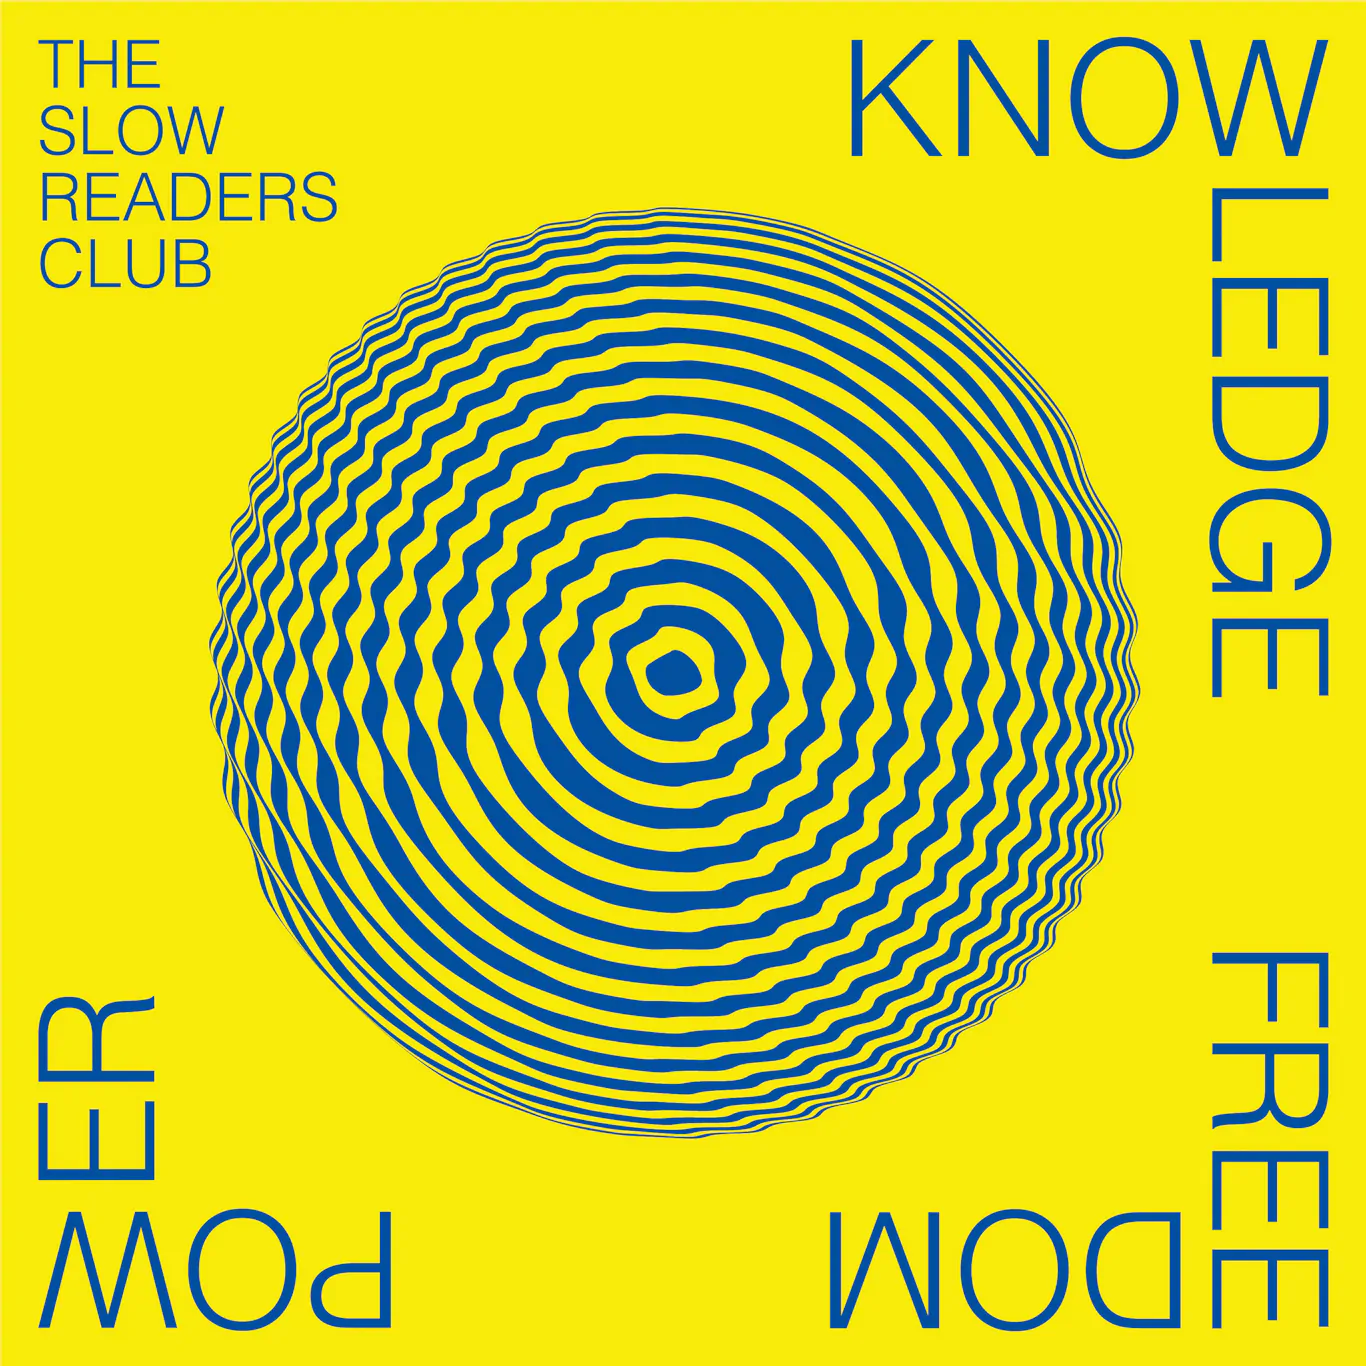 ALBUM REVIEW: The Slow Readers Club – Knowledge Freedom Power